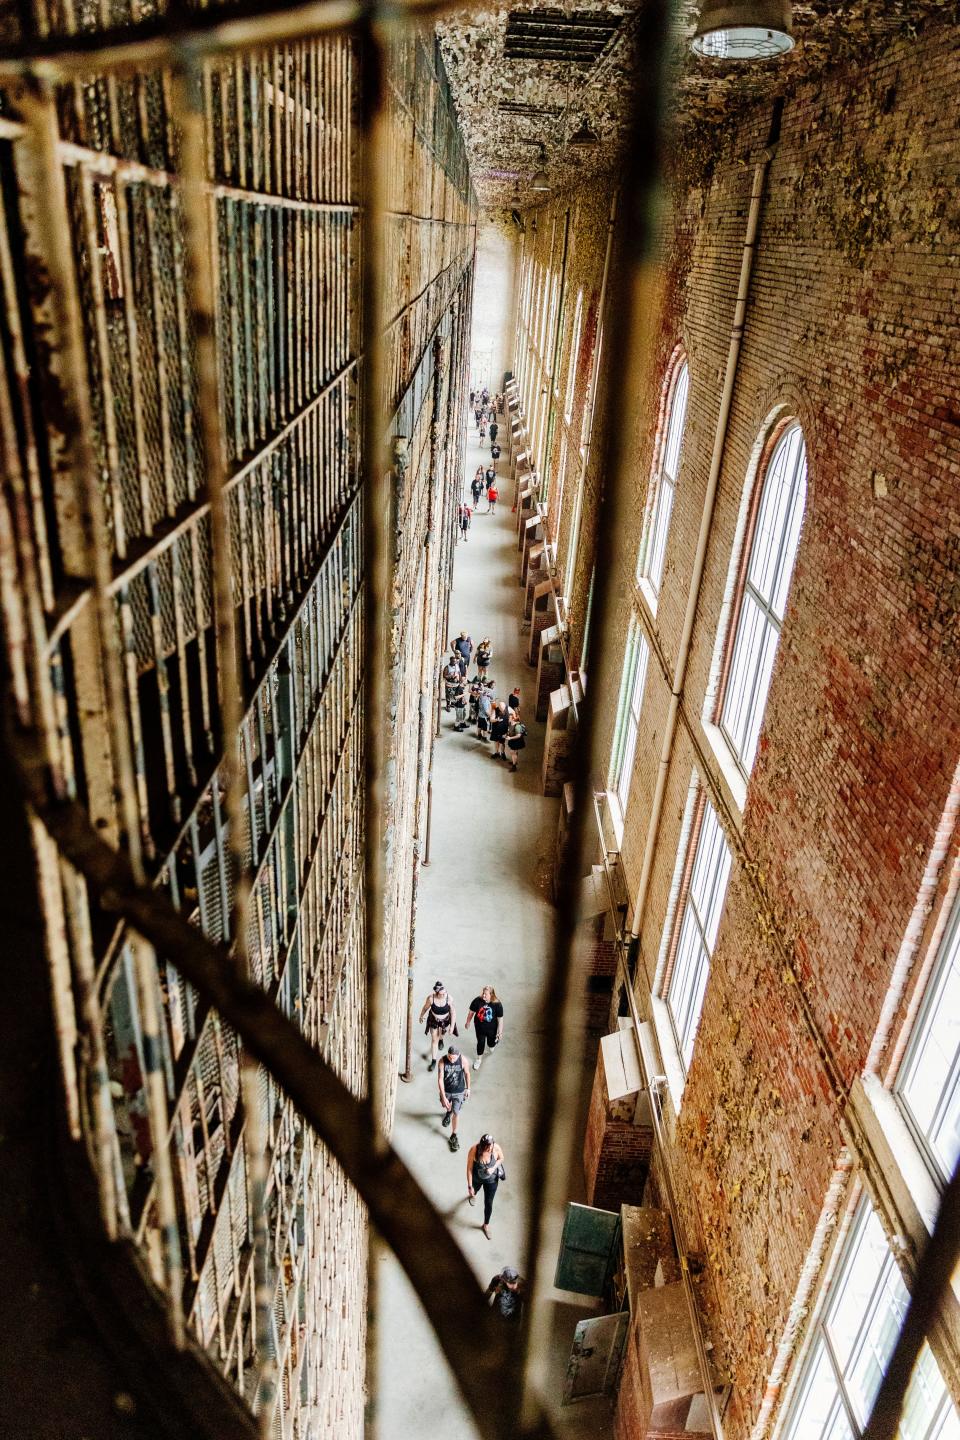 You can tour the cells of Ohio State Reformatory, made famous by “The Shawshank Redemption.”